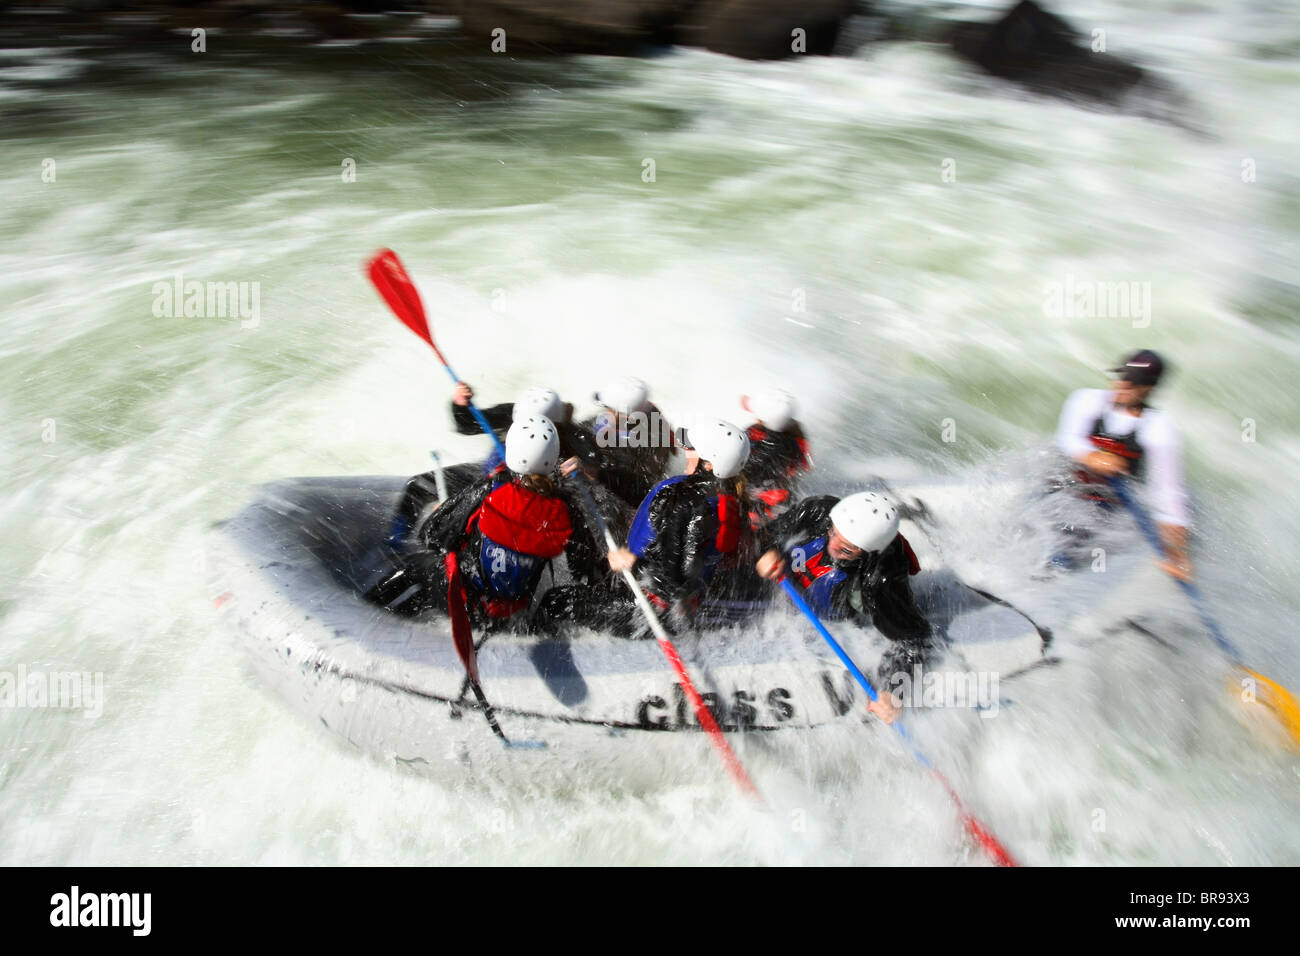 Unknown rafters roll through the infamous Pillow Rock rapid on the Upper Gauley River near Fayetteville WV Stock Photo